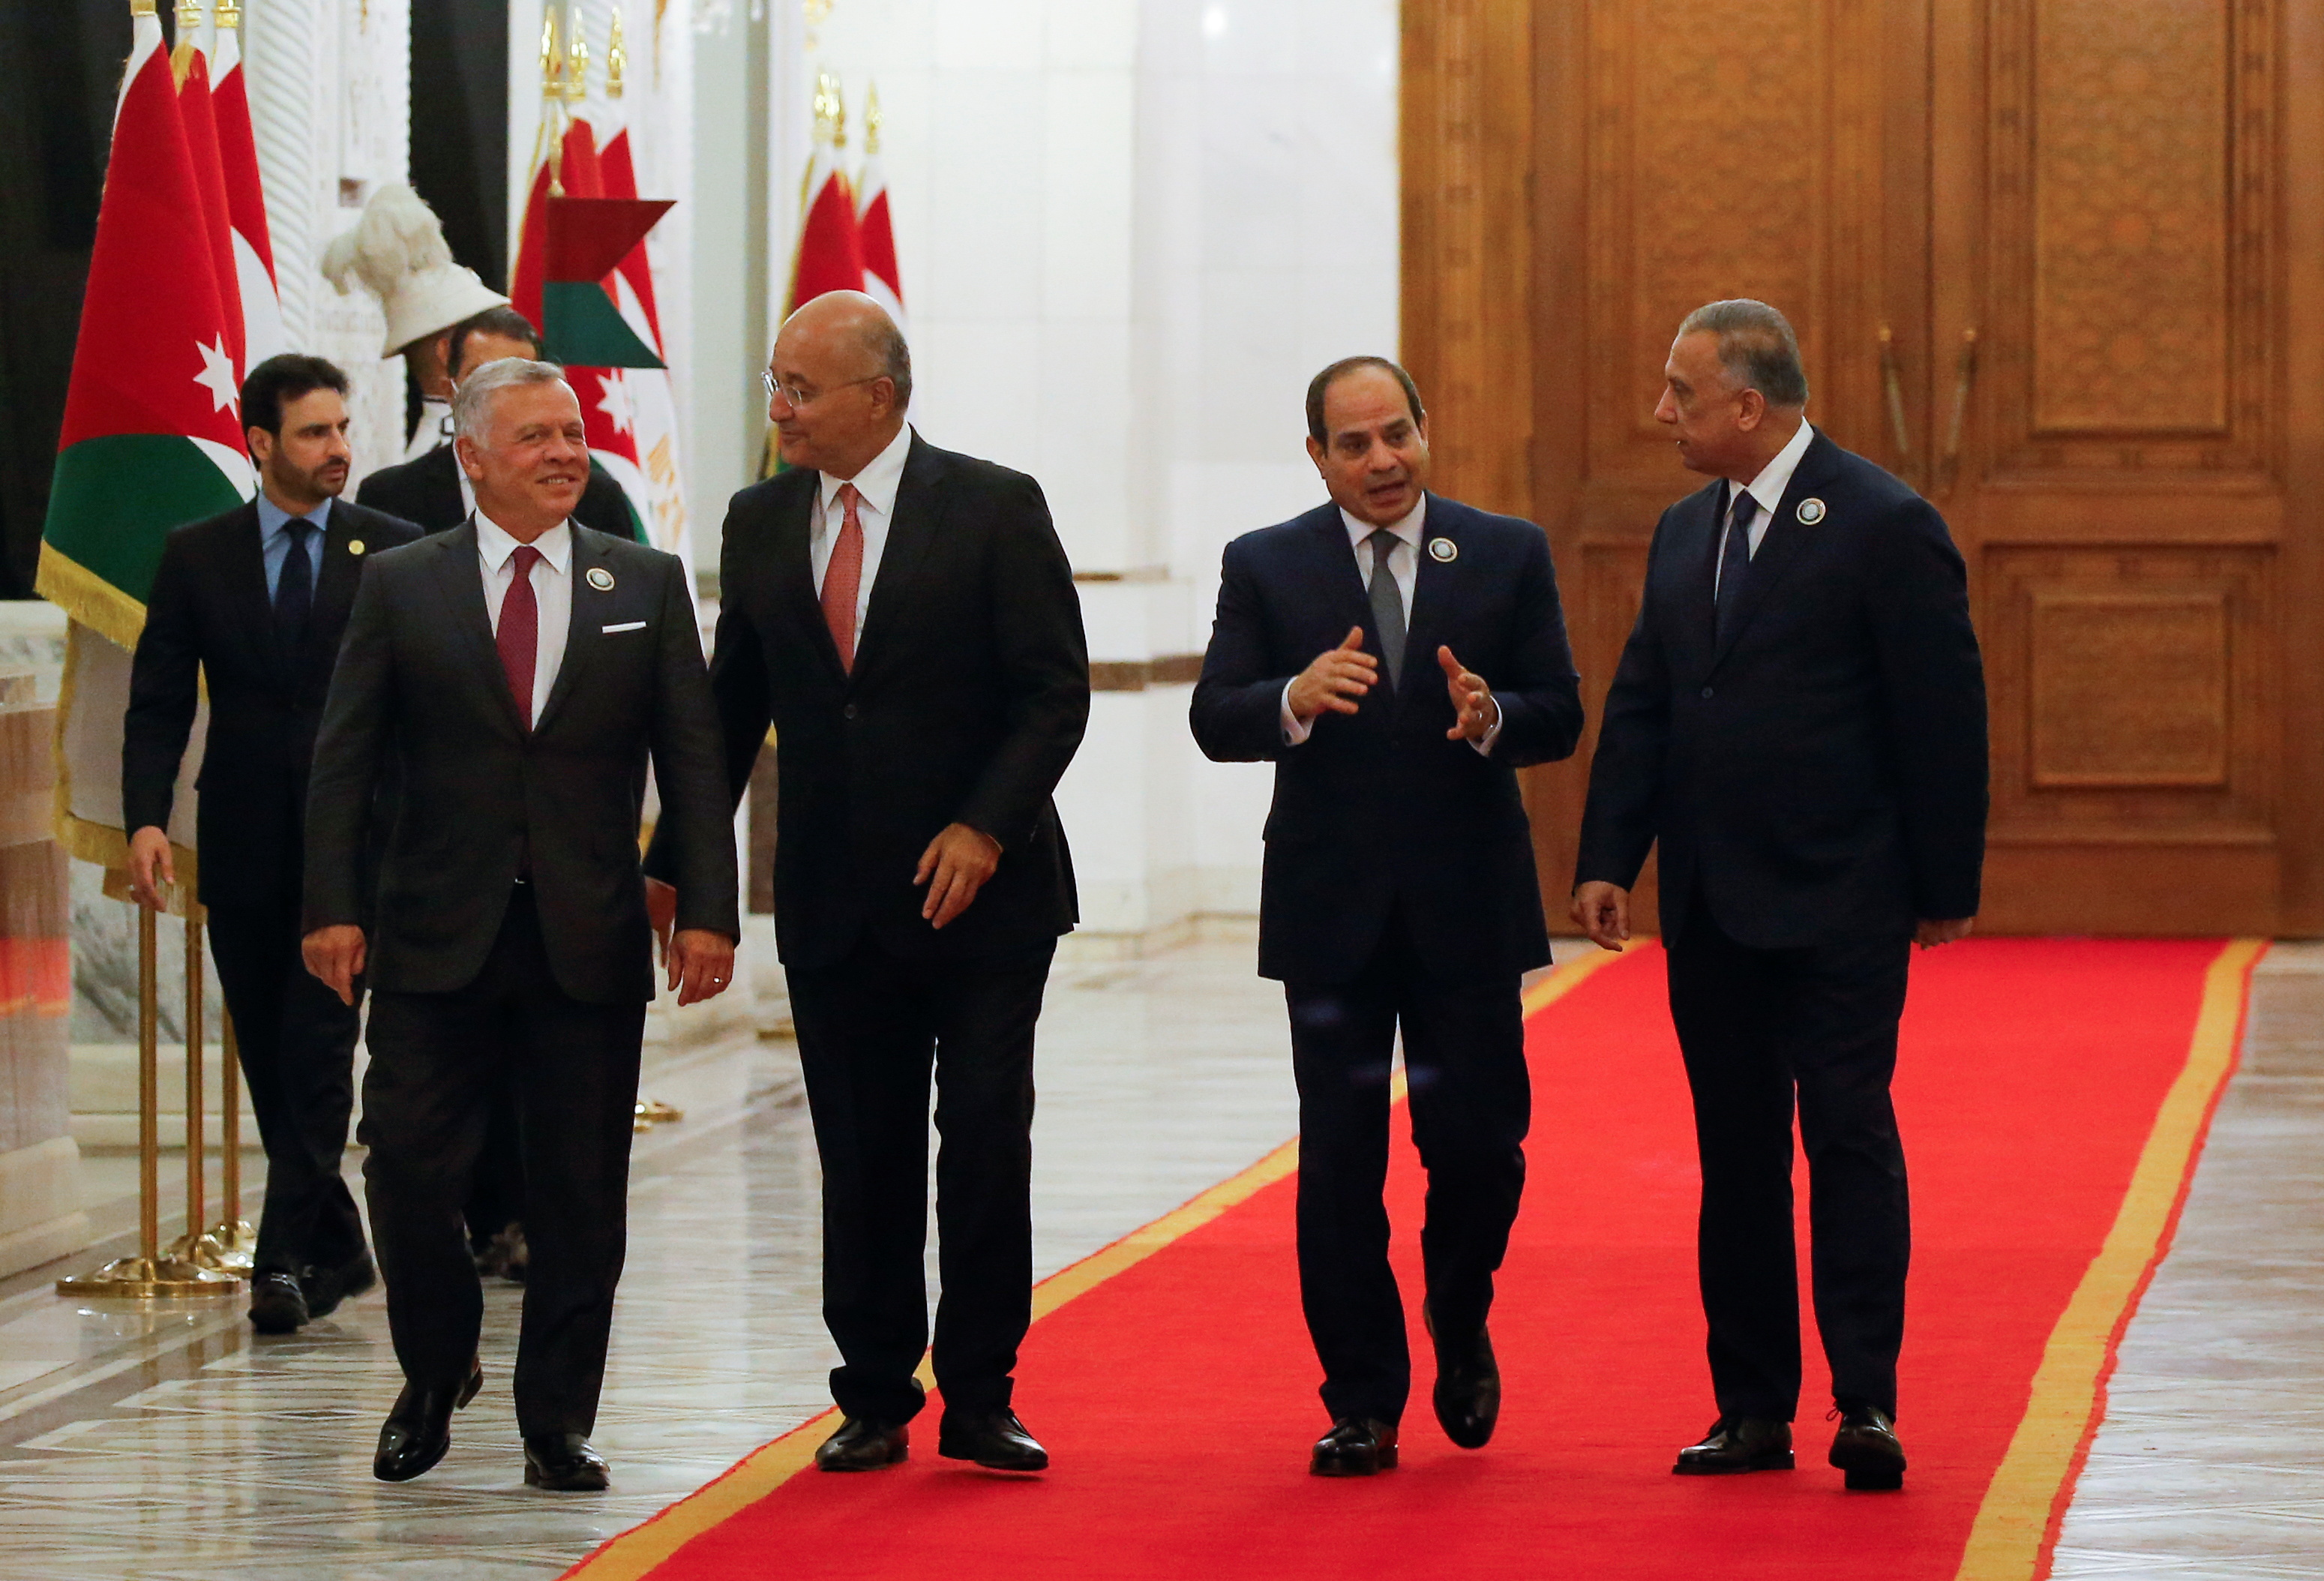 Egypt, Iraq, and Jordan: A new partnership 30 years in the making?